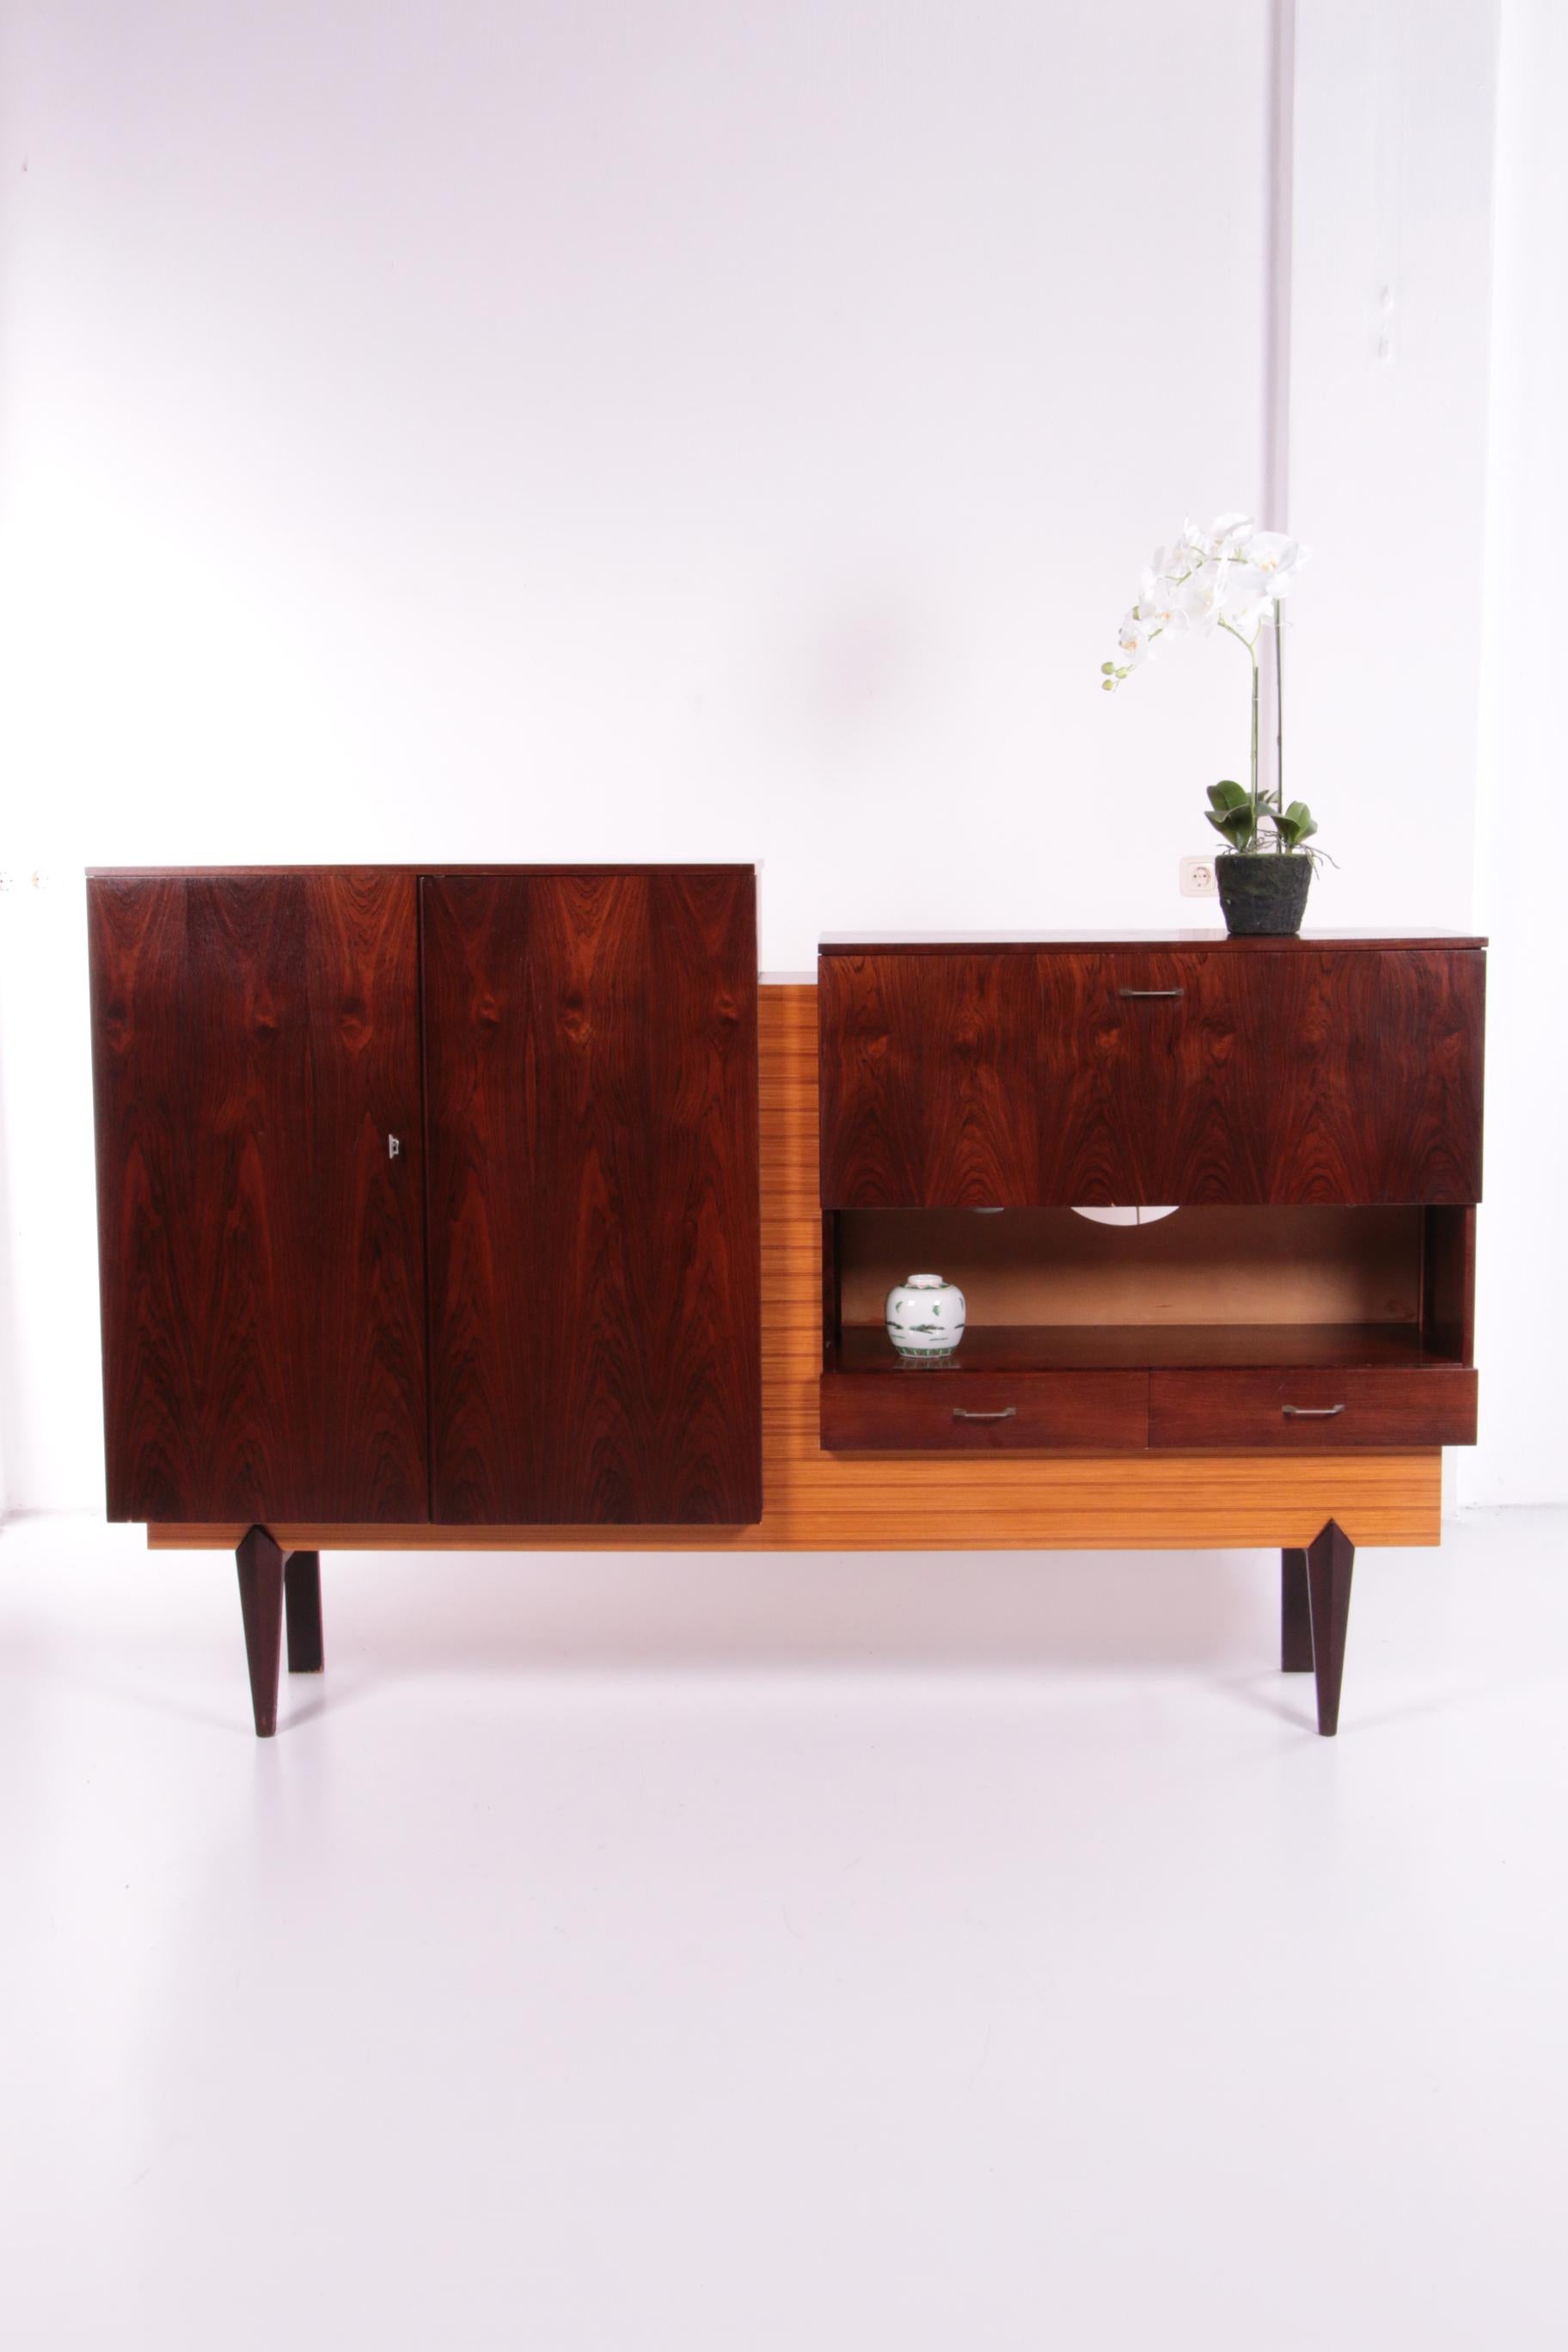 Beautiful vintage wall cabinet made in the Netherlands in the 1960s.

The cabinet is made of 2 types of wood, darkwood, finished with veneer and walnut.

On the left side are large doors with three sturdy shelves.

At the top right of a bar cabinet